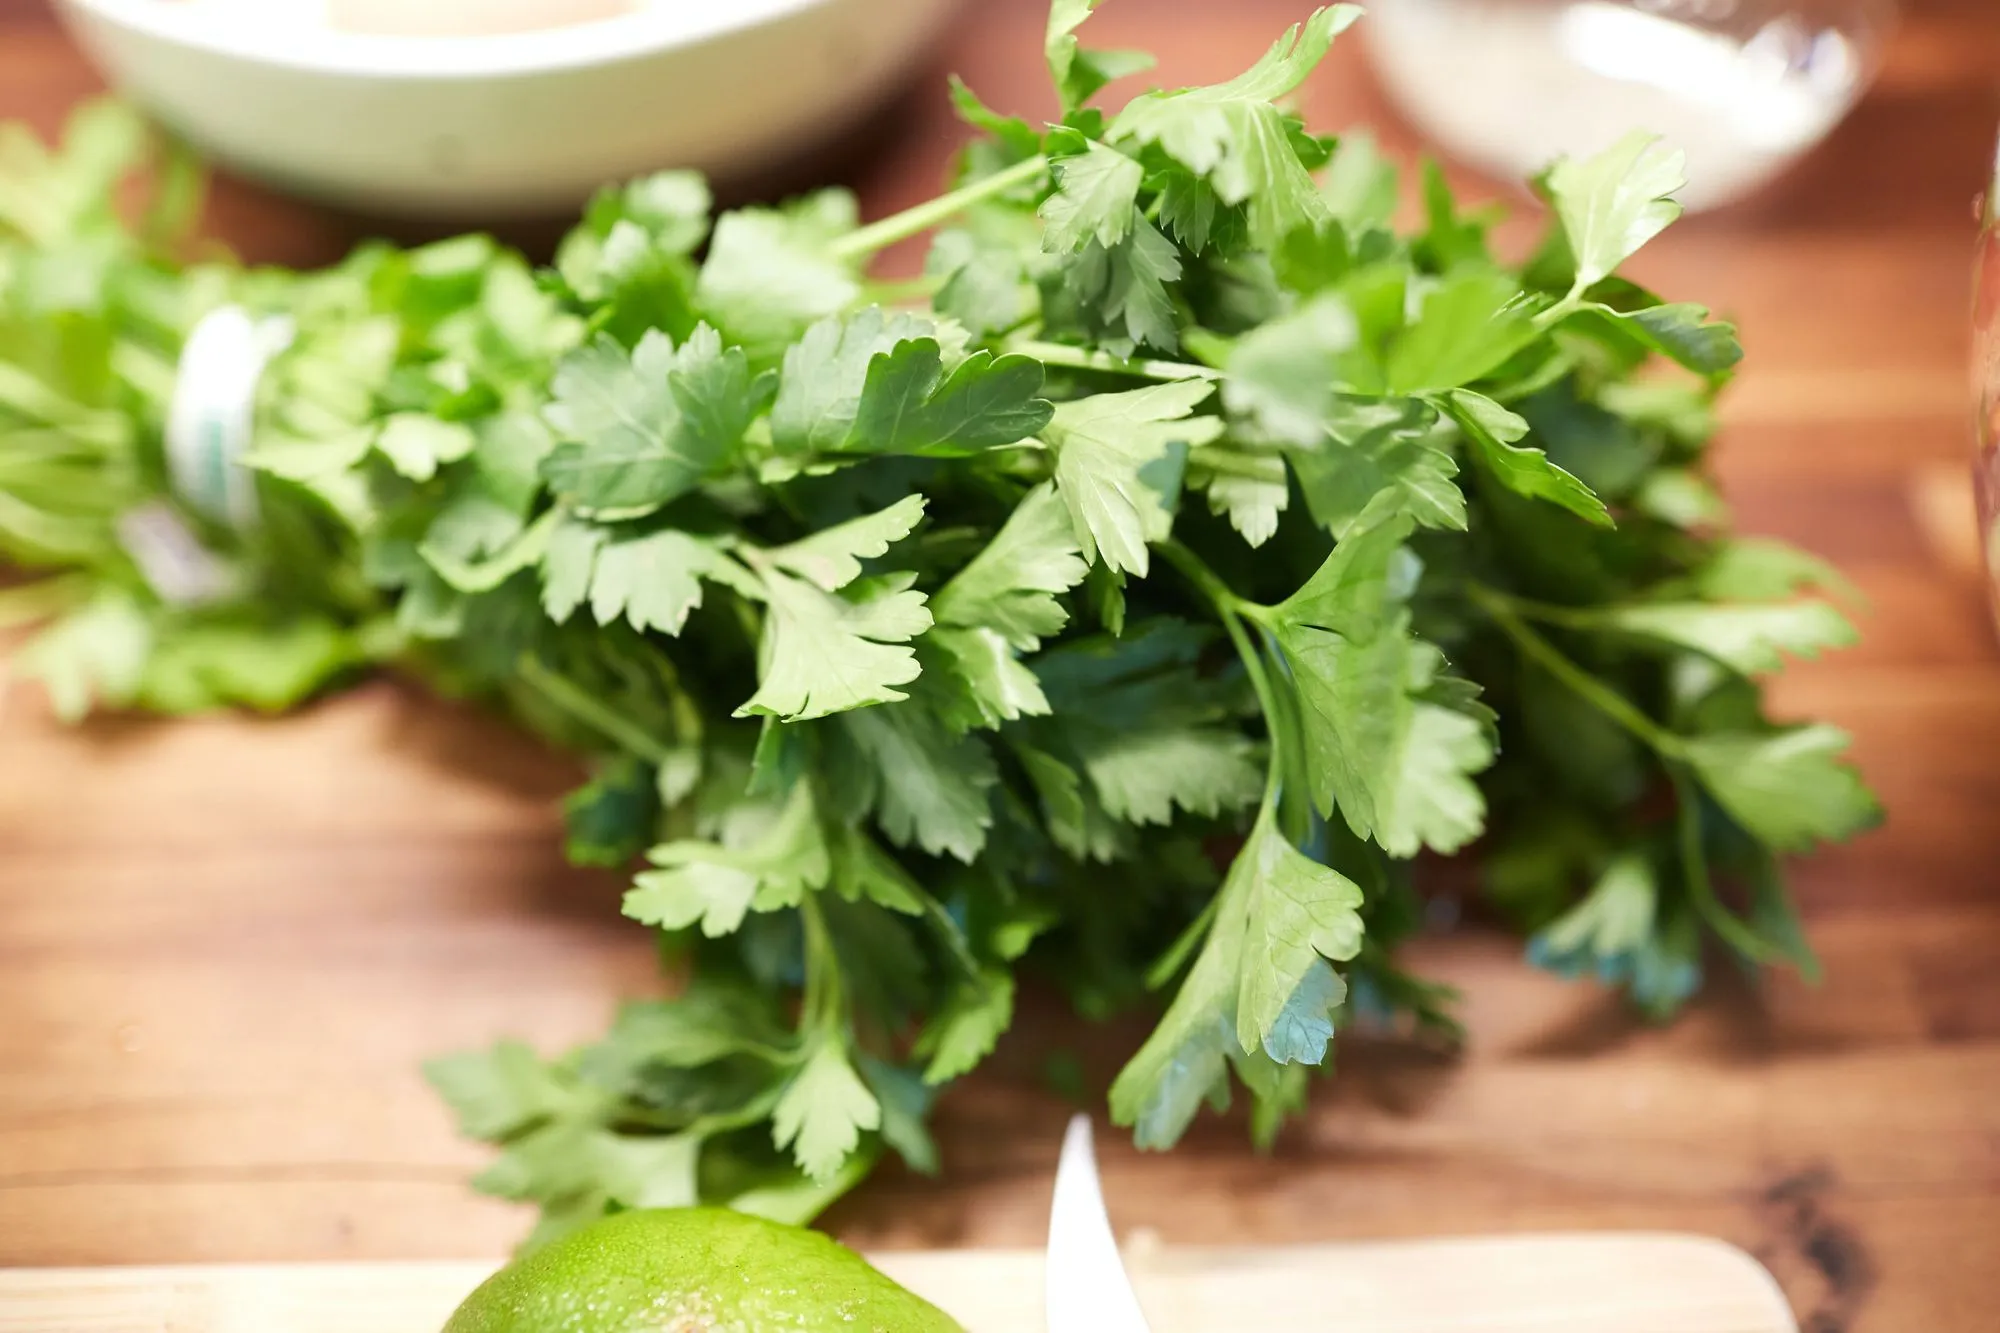 Treat your pets with a small amount of parsley once or twice a week.